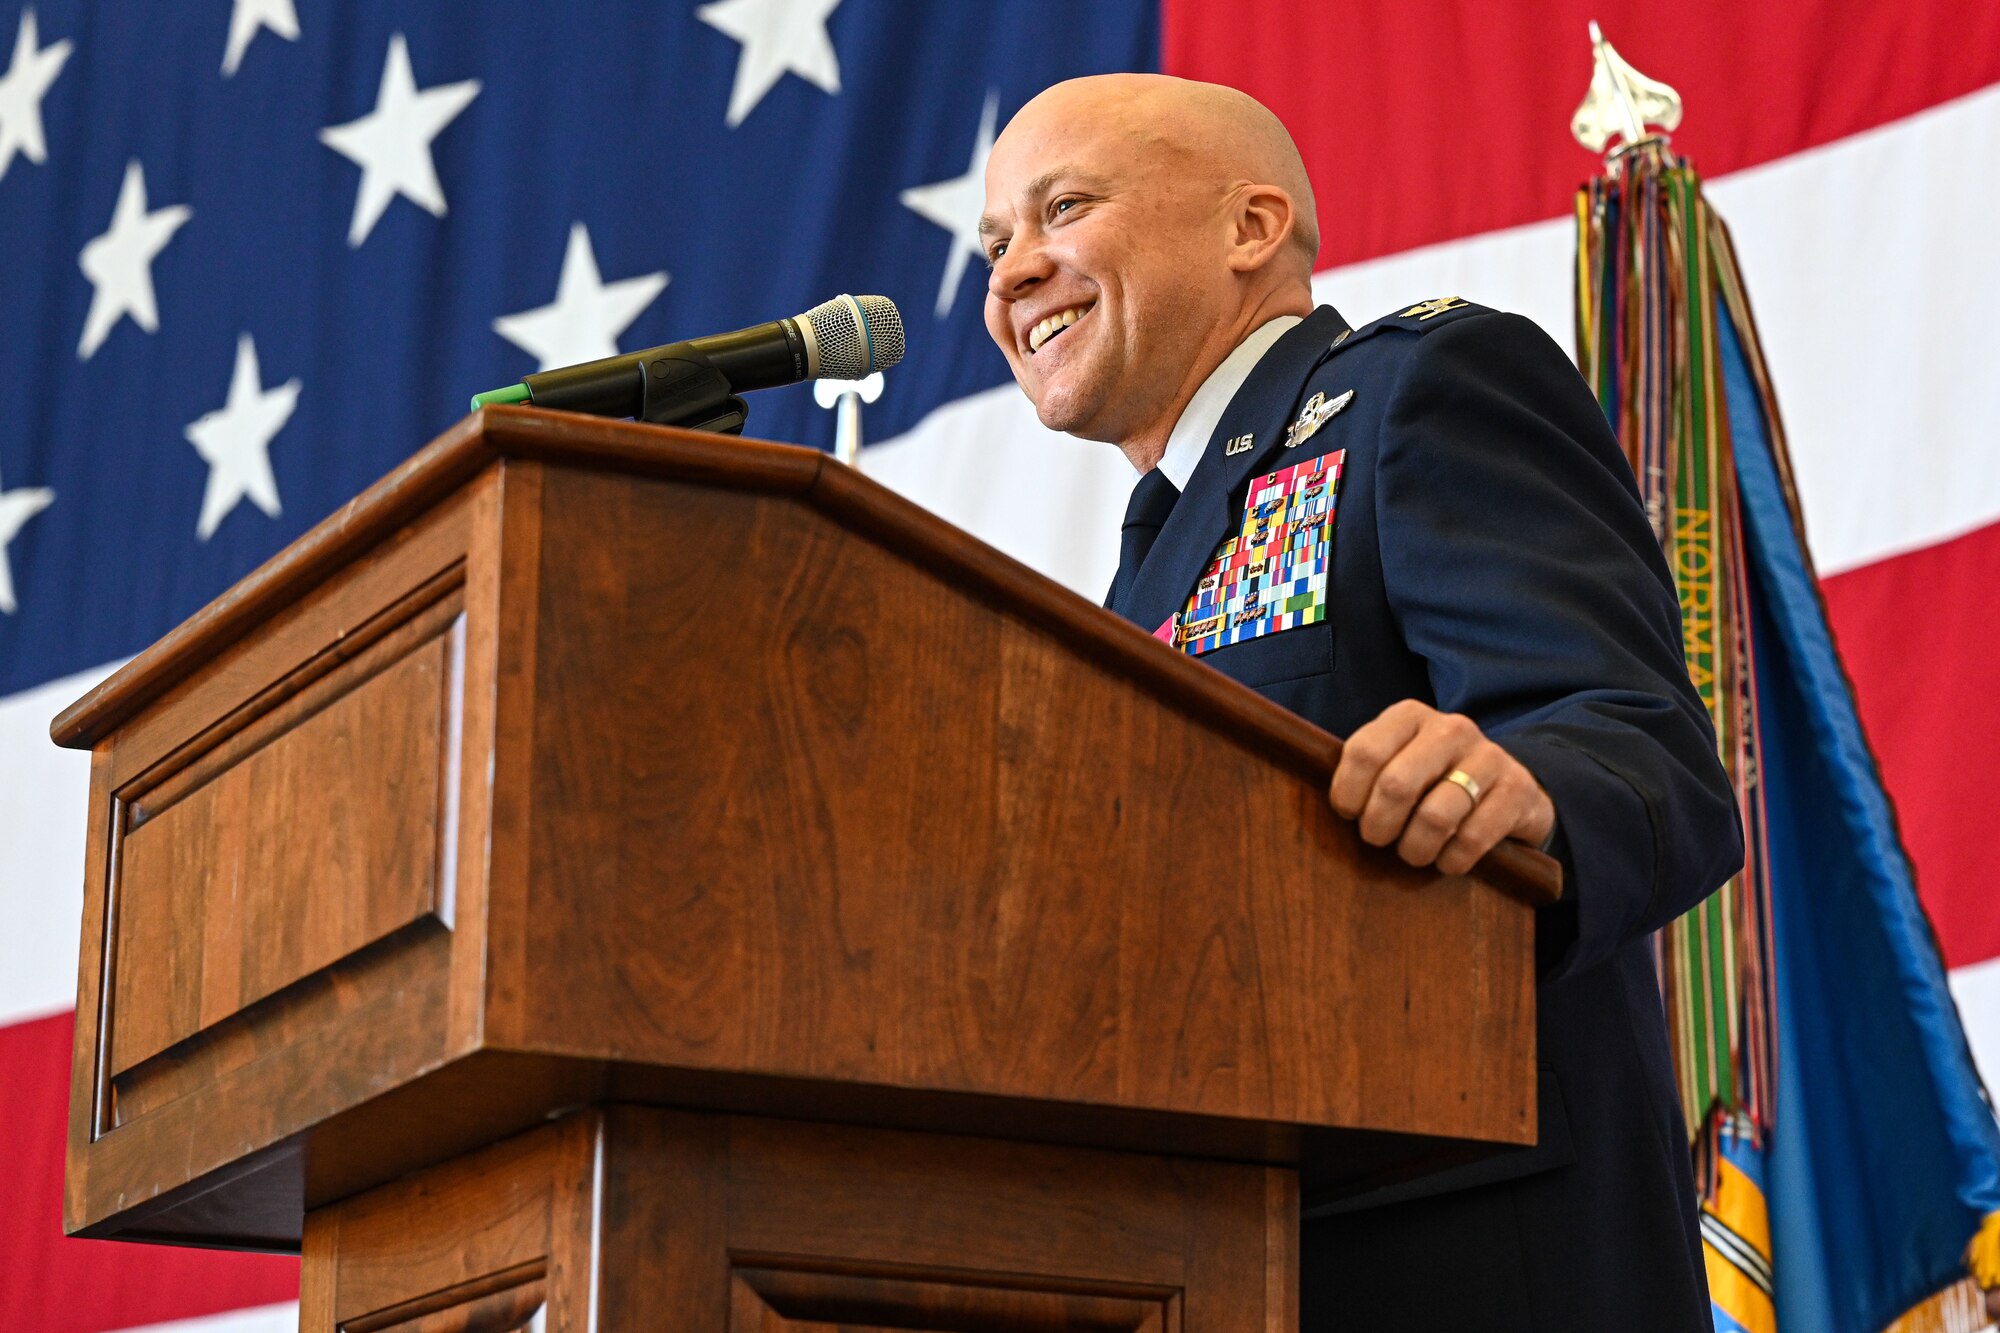 Col. Joseph Miller, former 314th Airlift Wing commander, gives remarks during the 314th Airlift Wing’s change of command ceremony